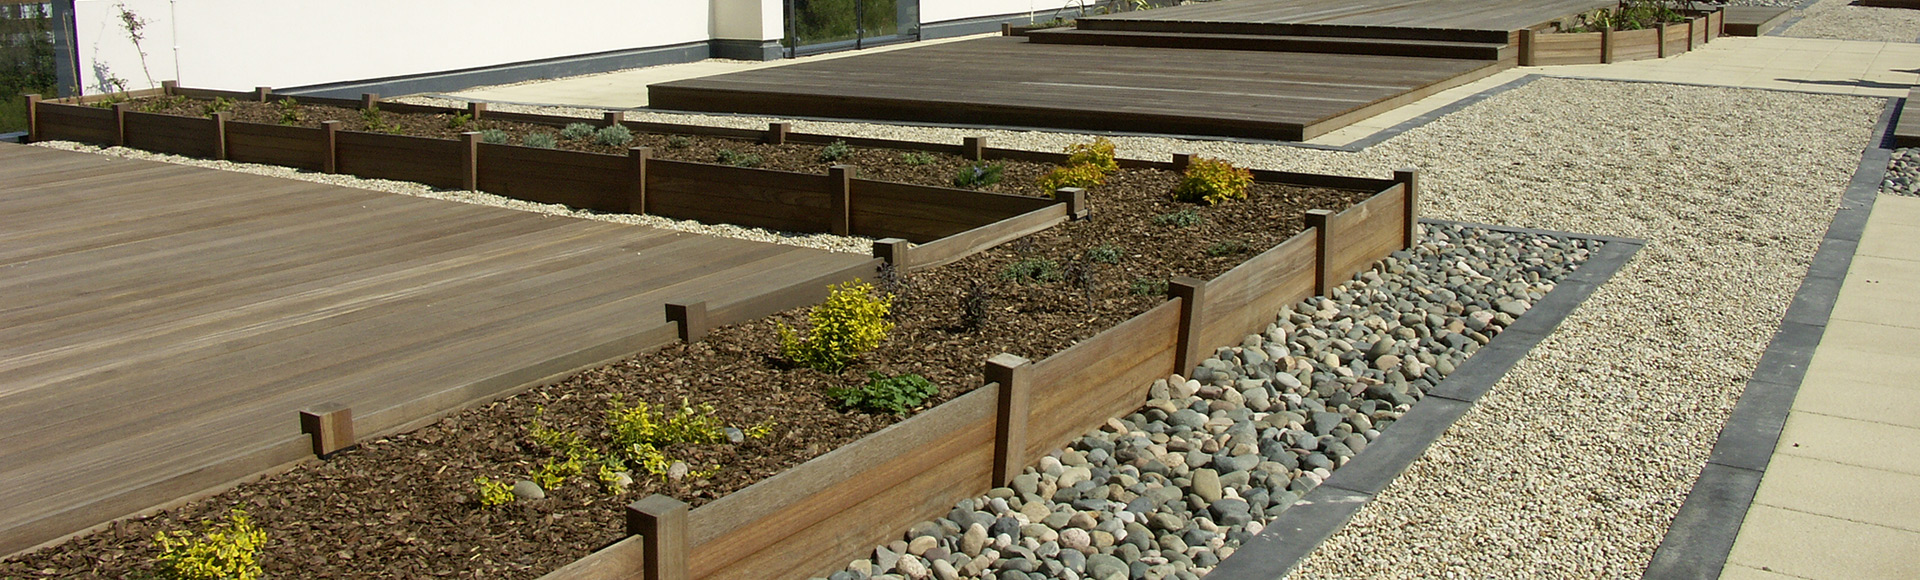 Hard Landscaping Green Roofs